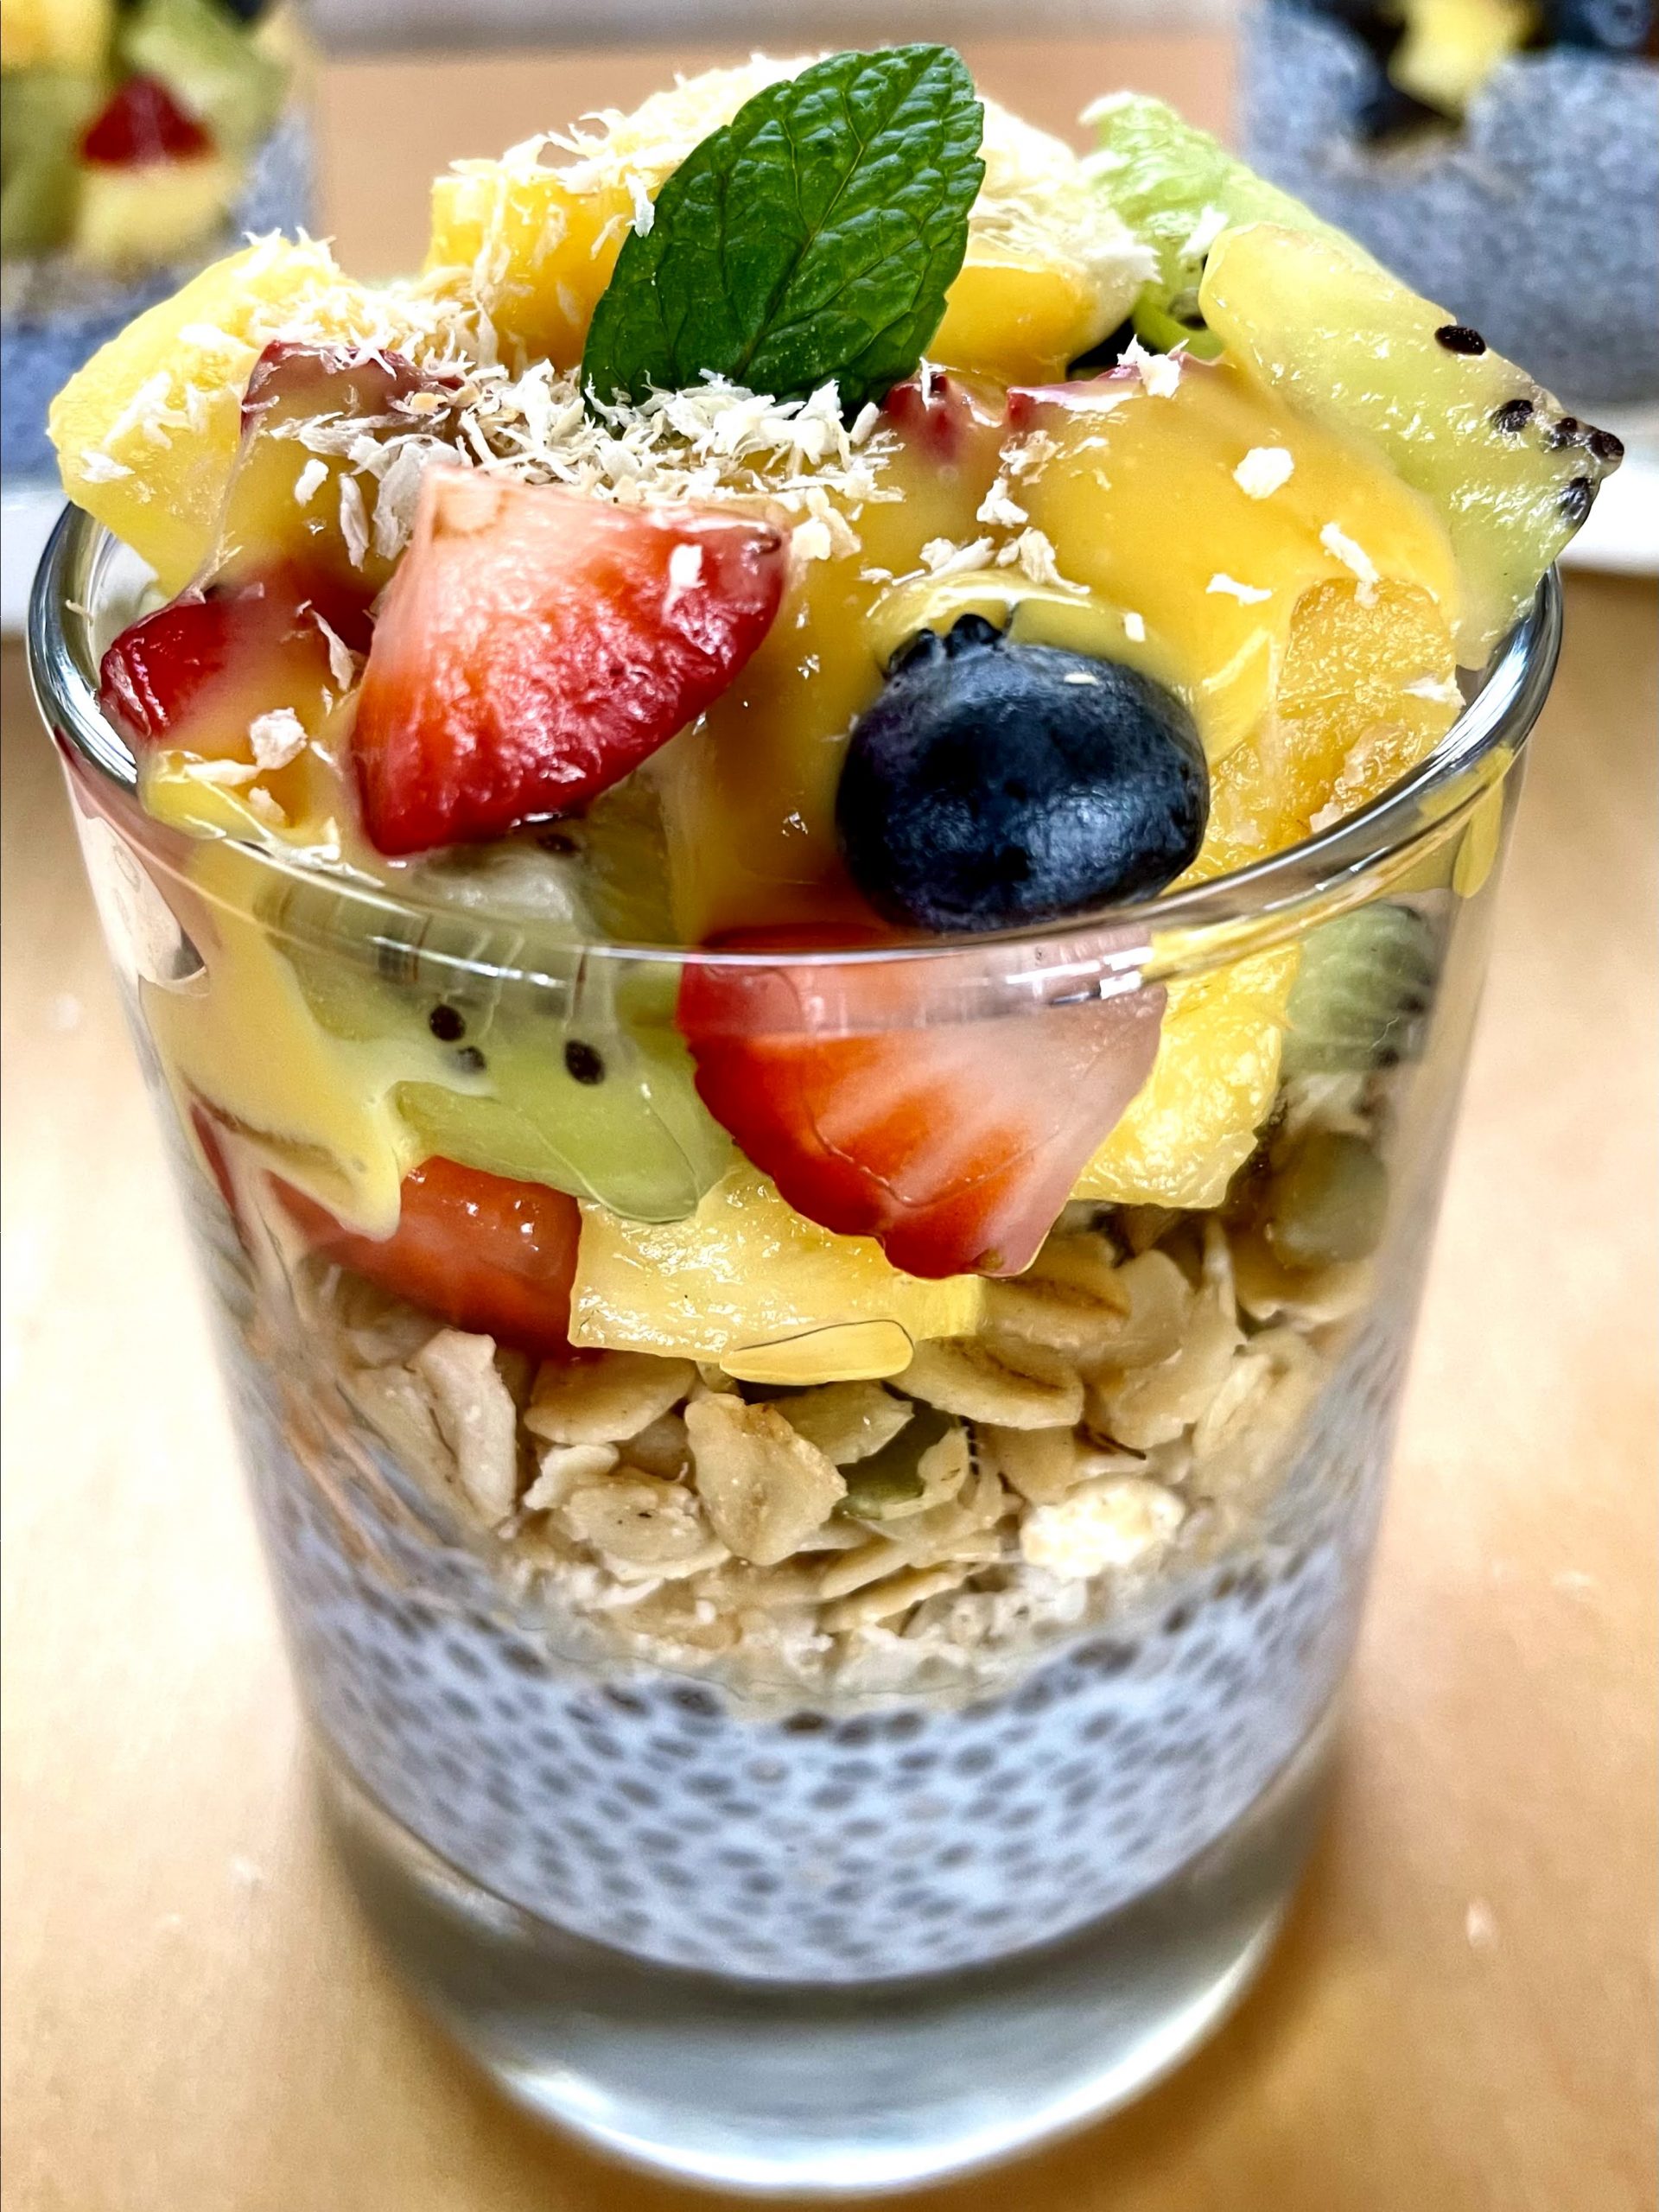 Sprinkle verrine with toasted coconut and mint for color.